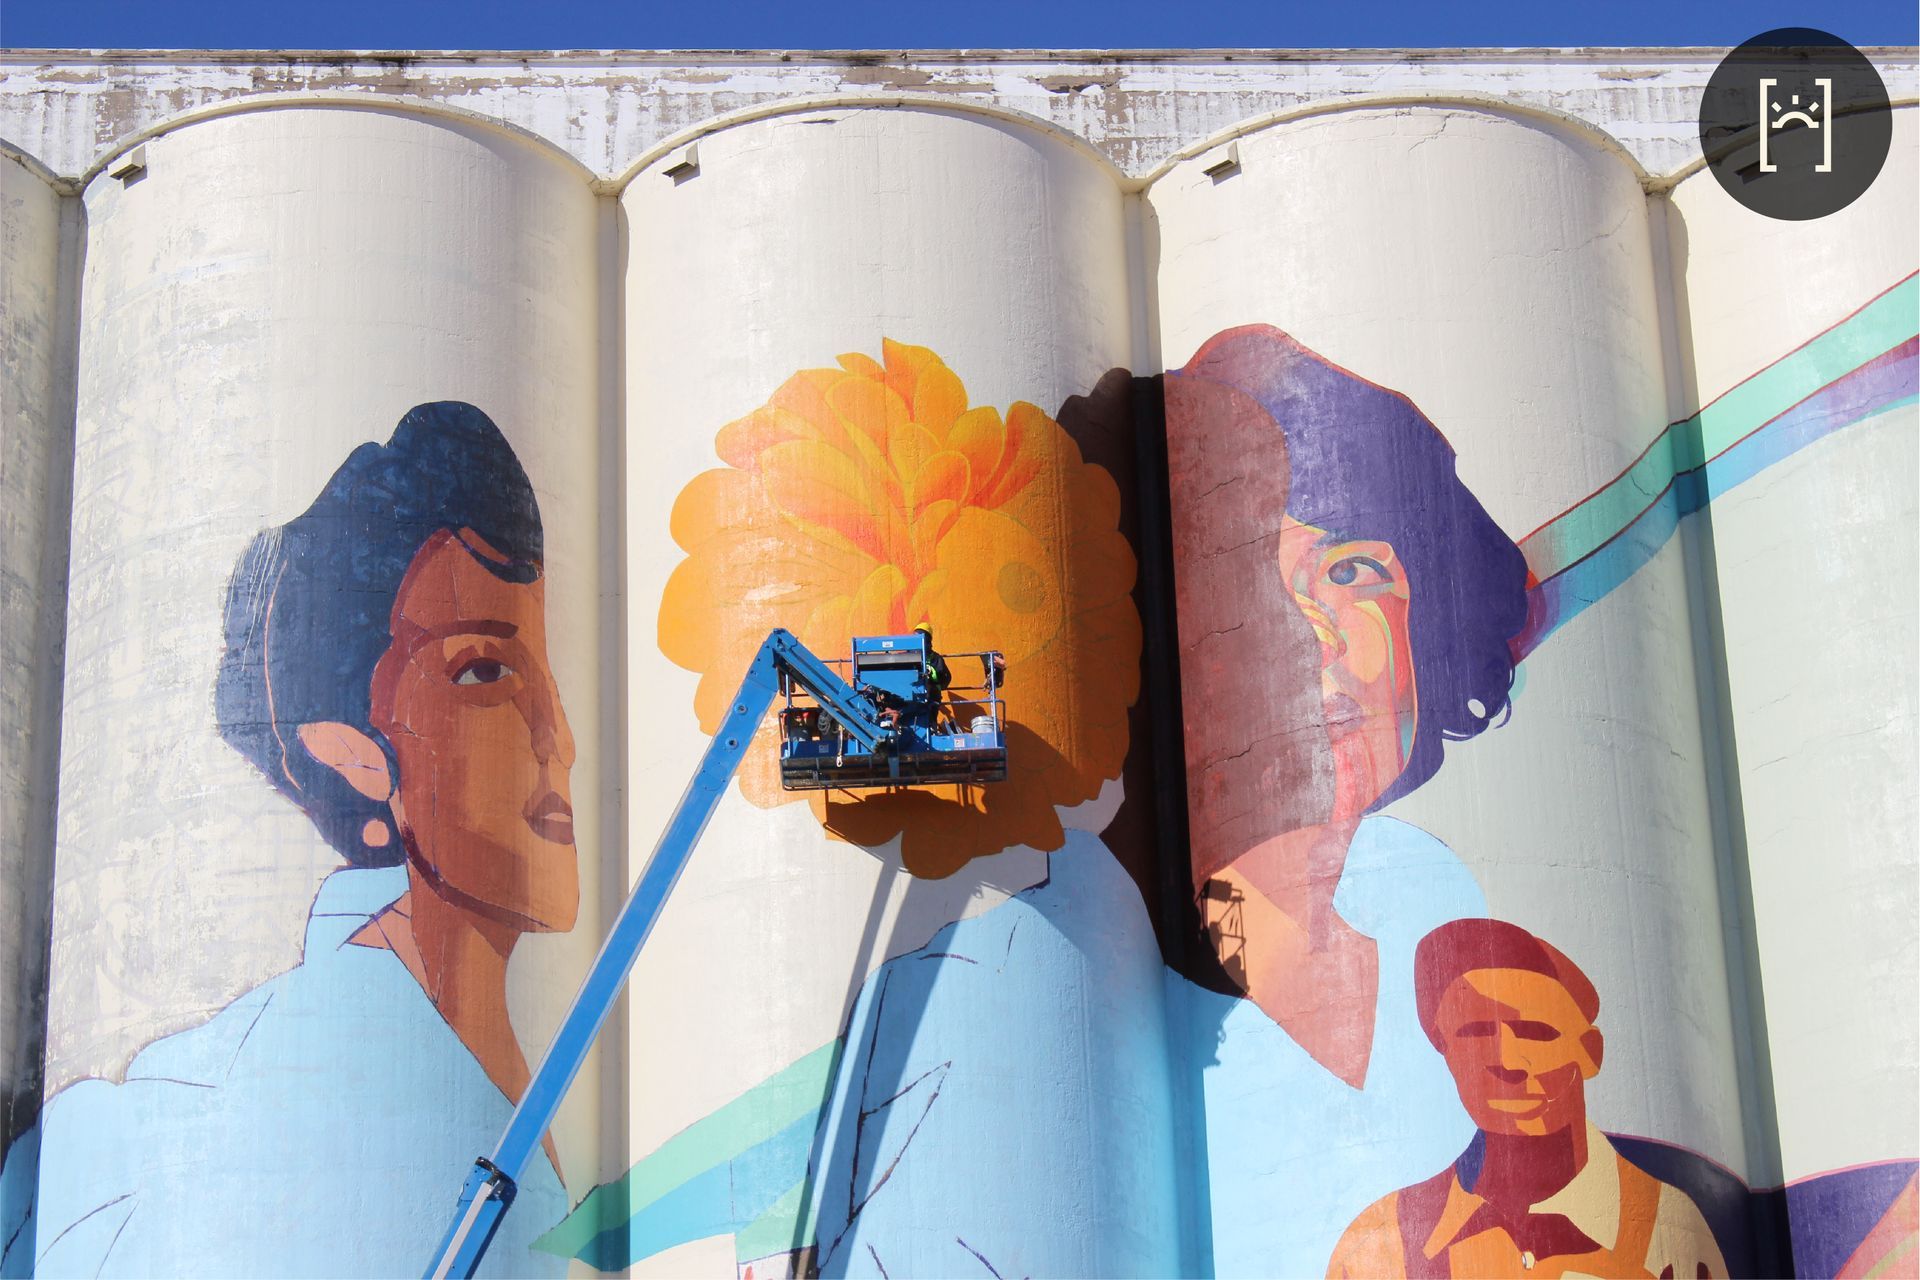 World’s Largest Mural by a Single Artist: world record in Wichita, Kansas